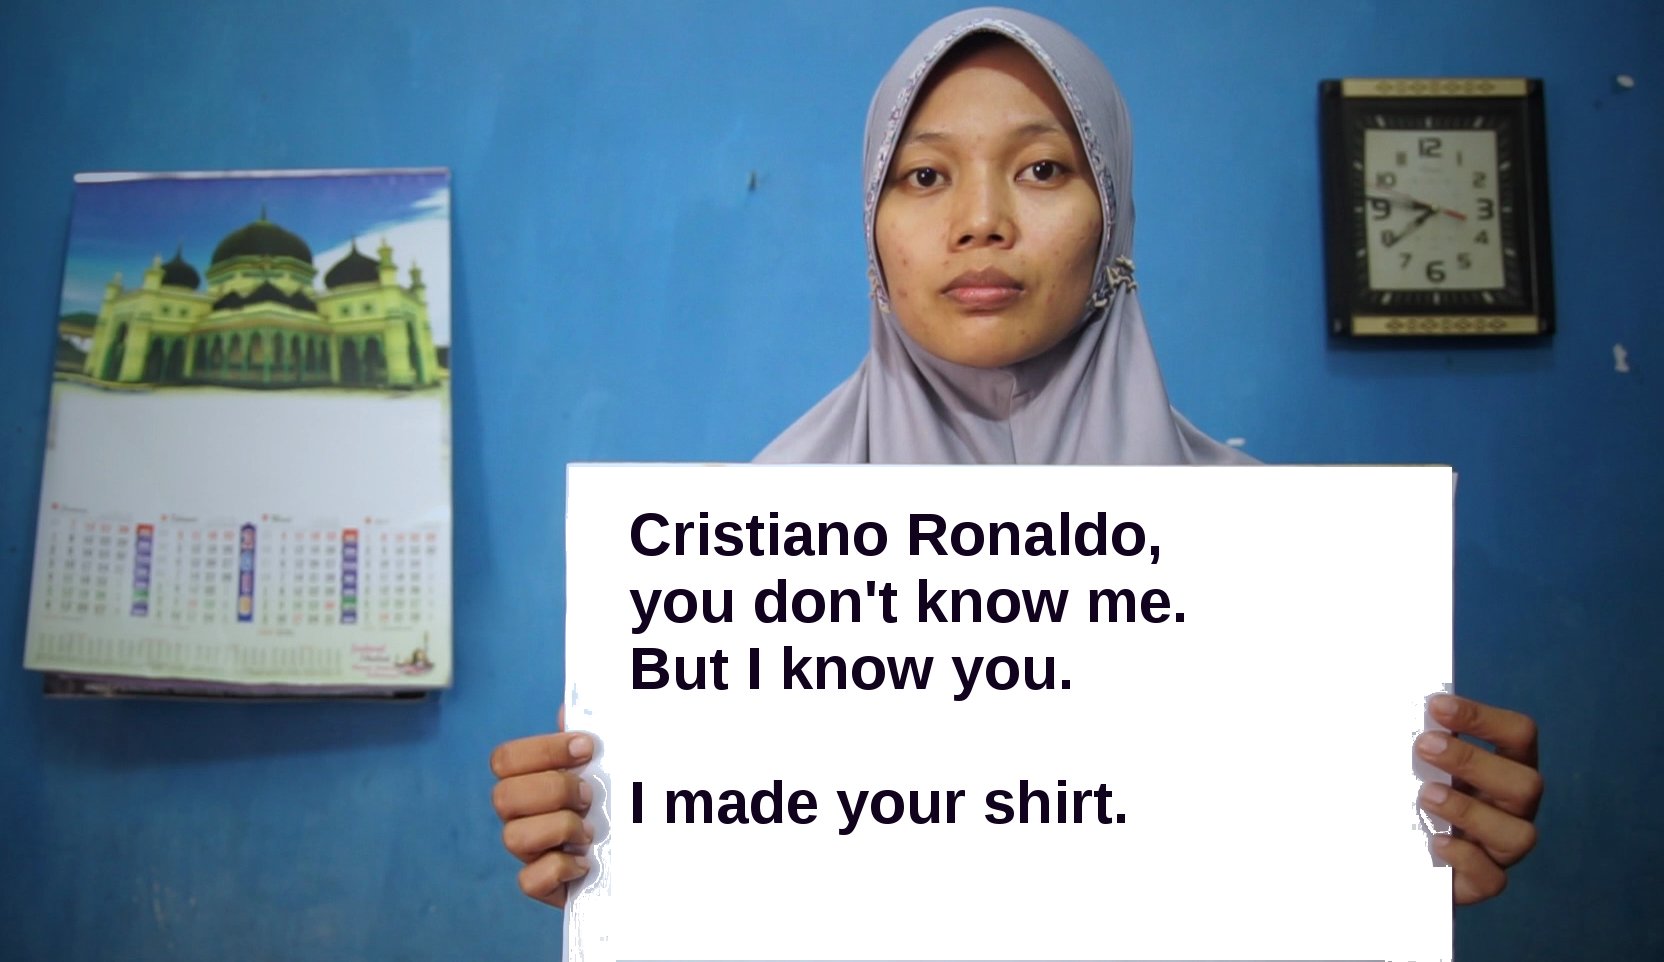 and pay record-breaking to footballers, but deny wages to women stitching their shirts — Clean Clothes Campaign